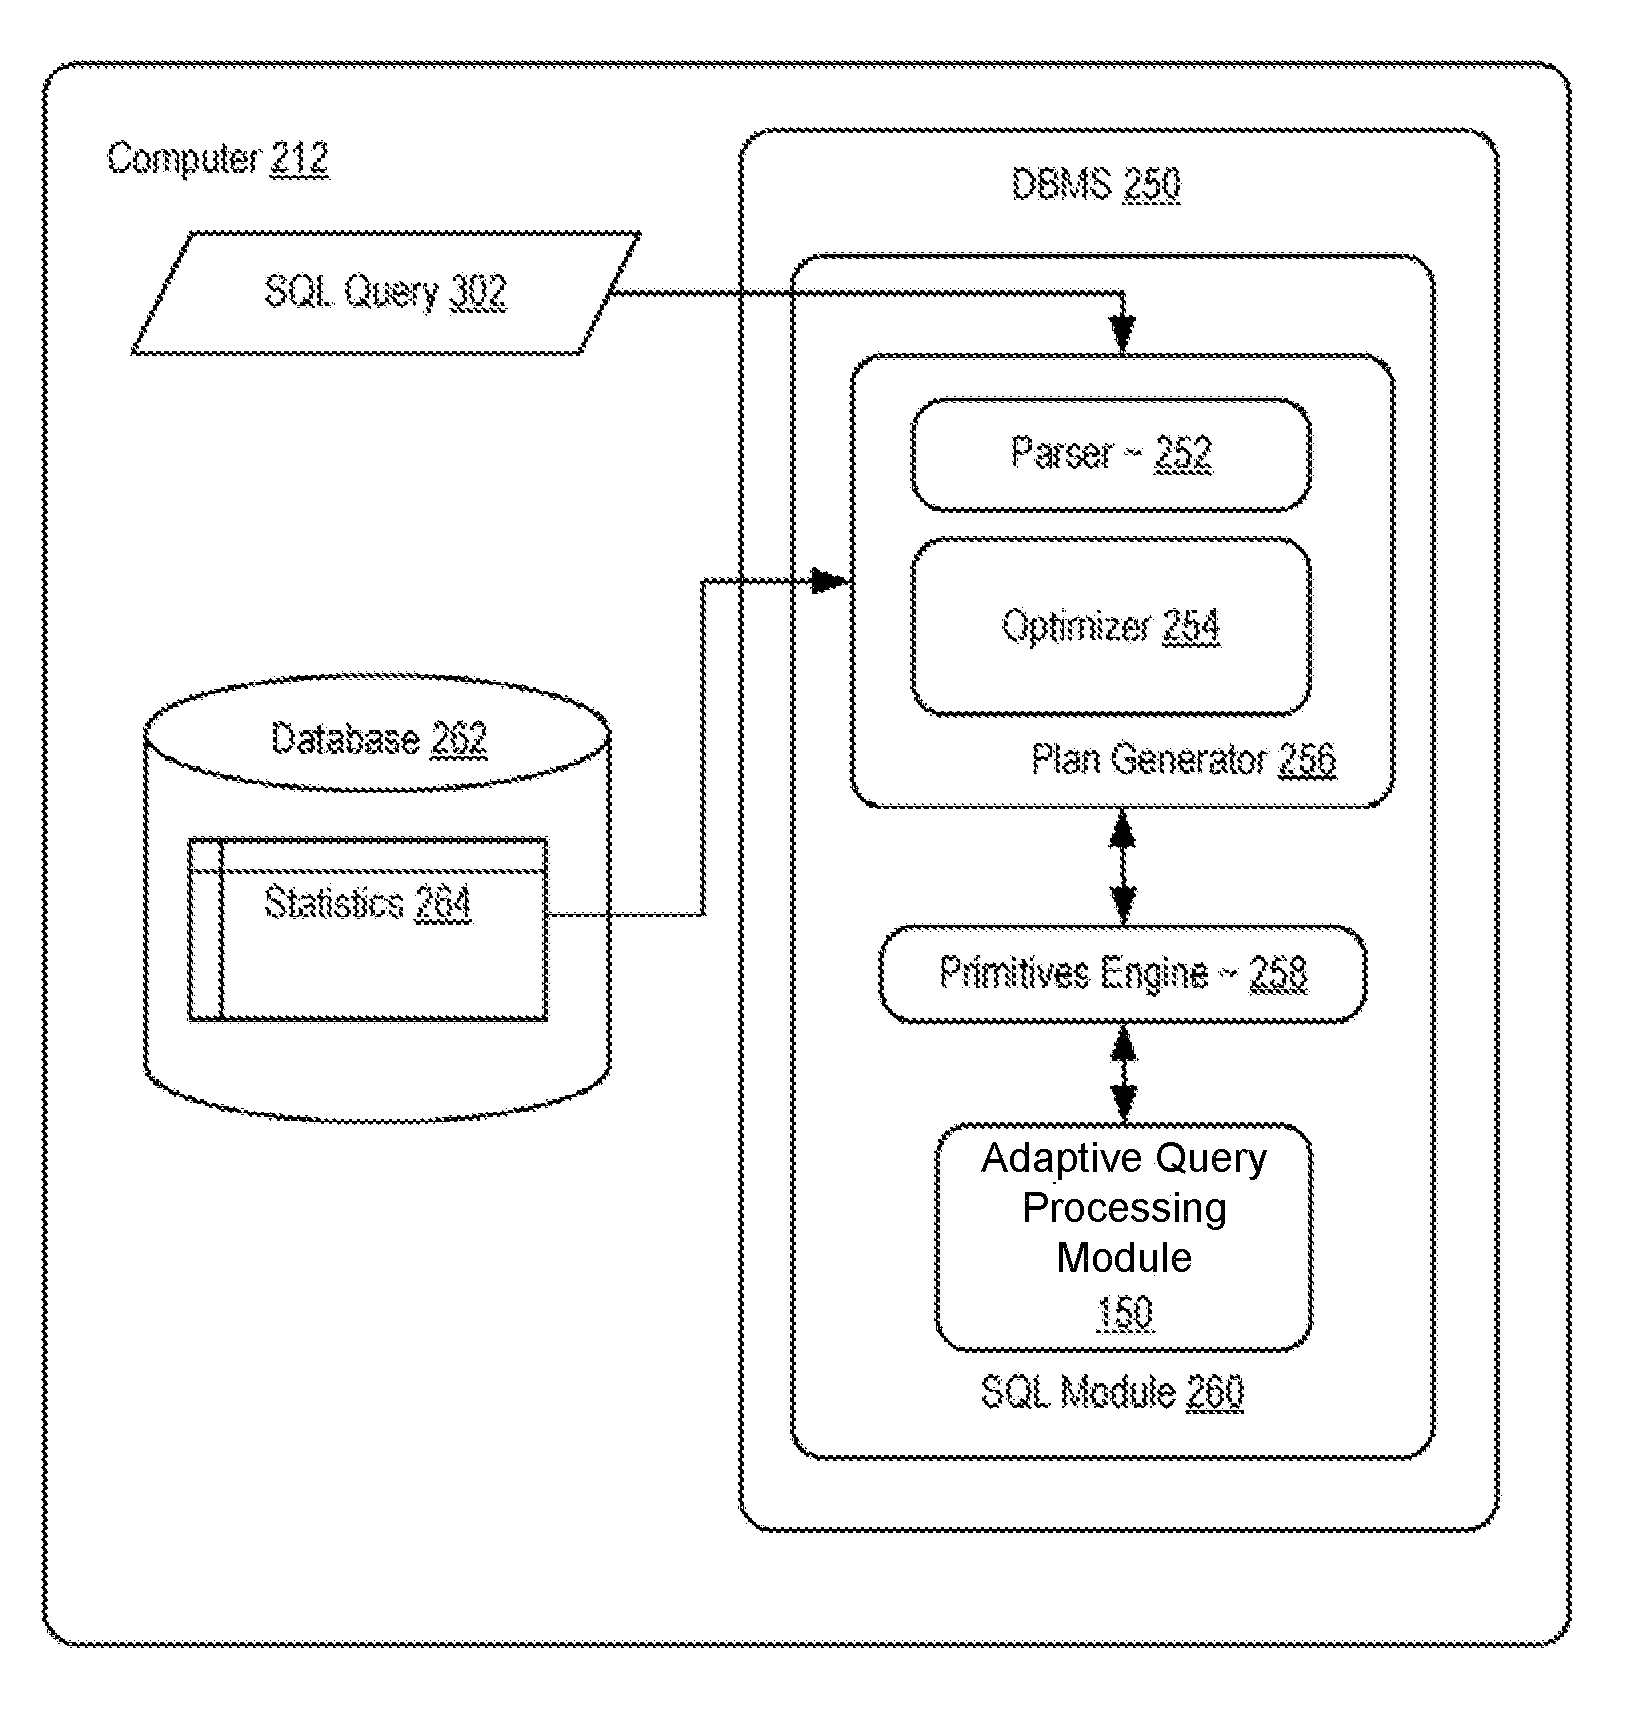 Adaptive Query Processing Infrastructure